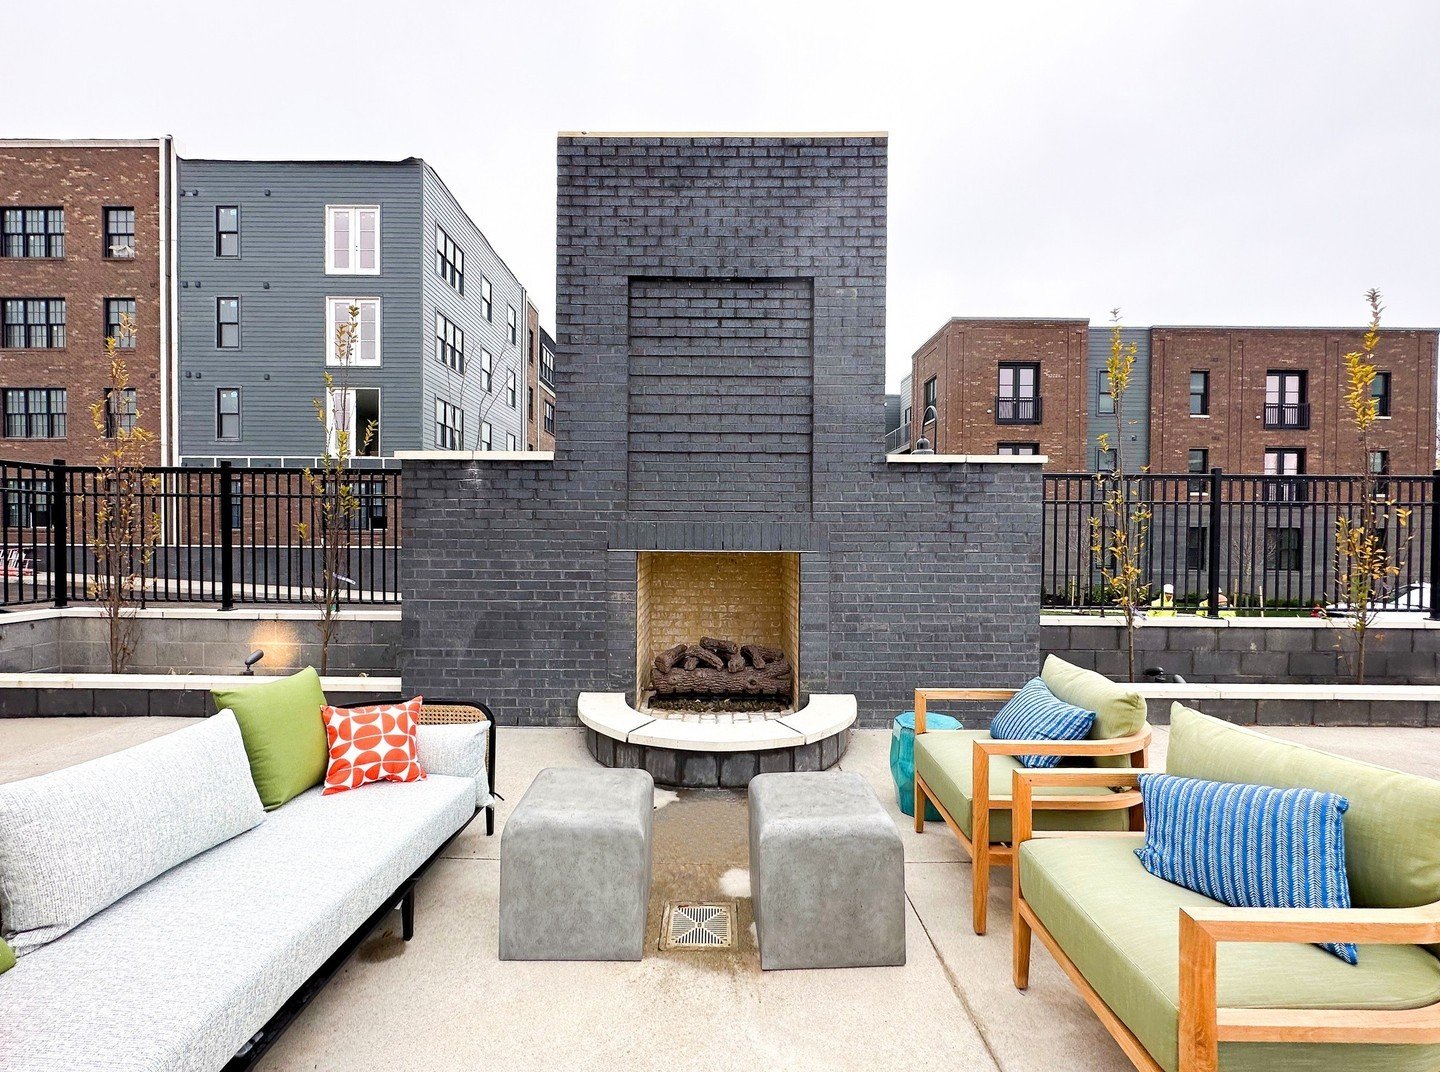 Spring is here! With the weather warming up, we are so excited for our residents to begin using the outdoor fireplace! 🌃